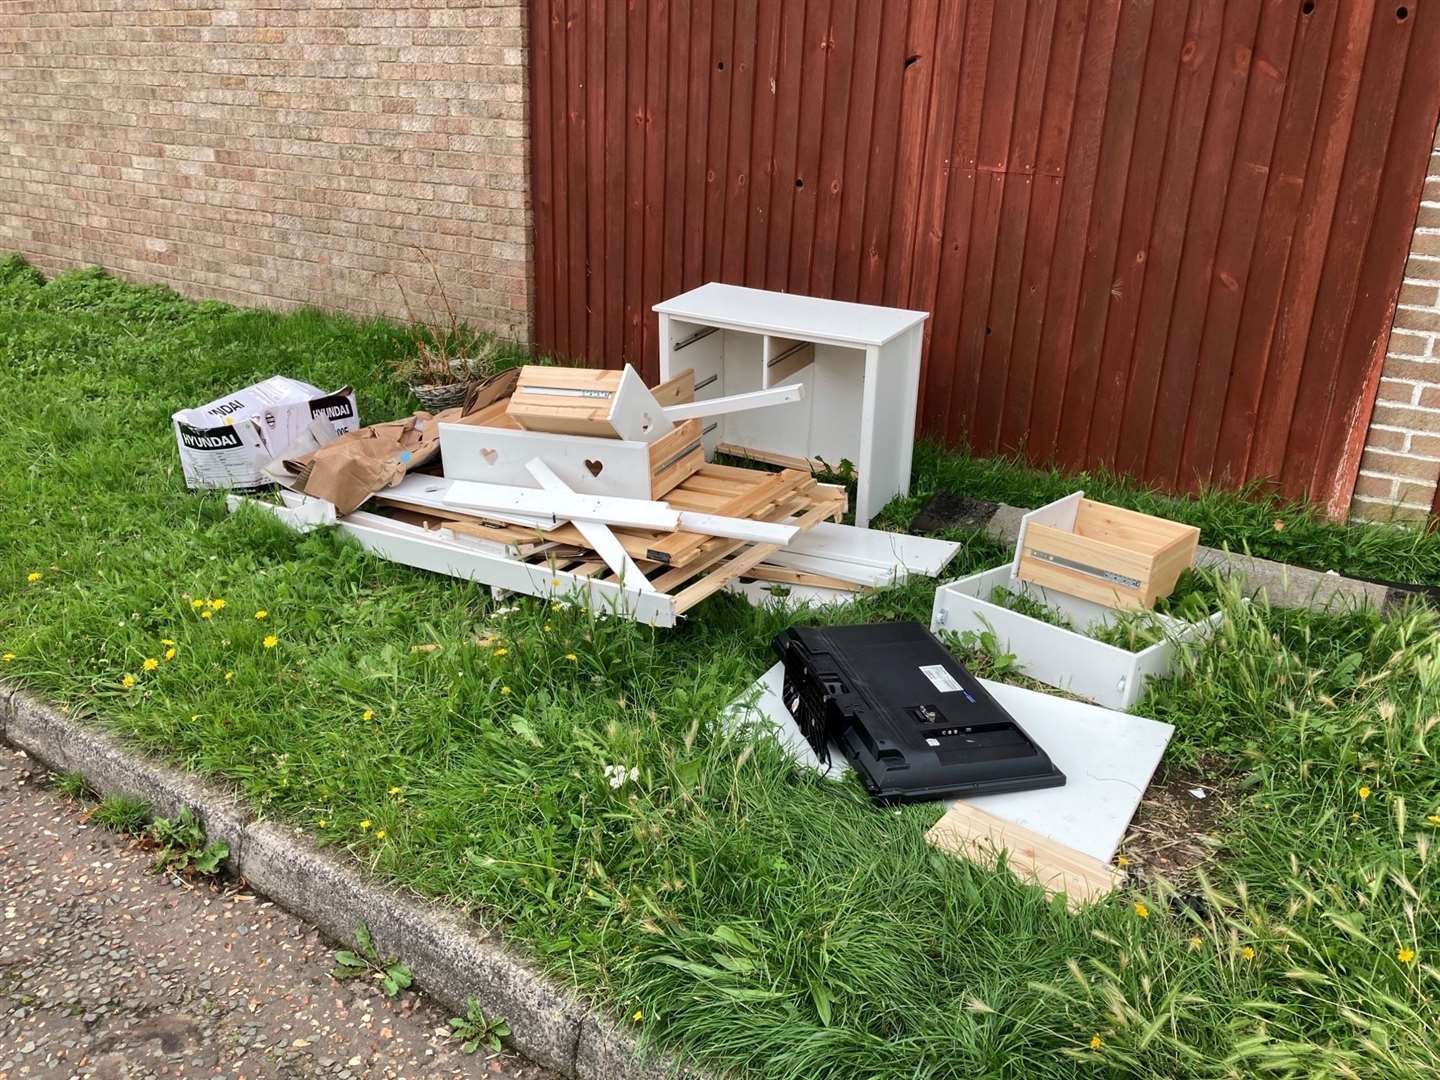 The waste dumped on Brockley Green